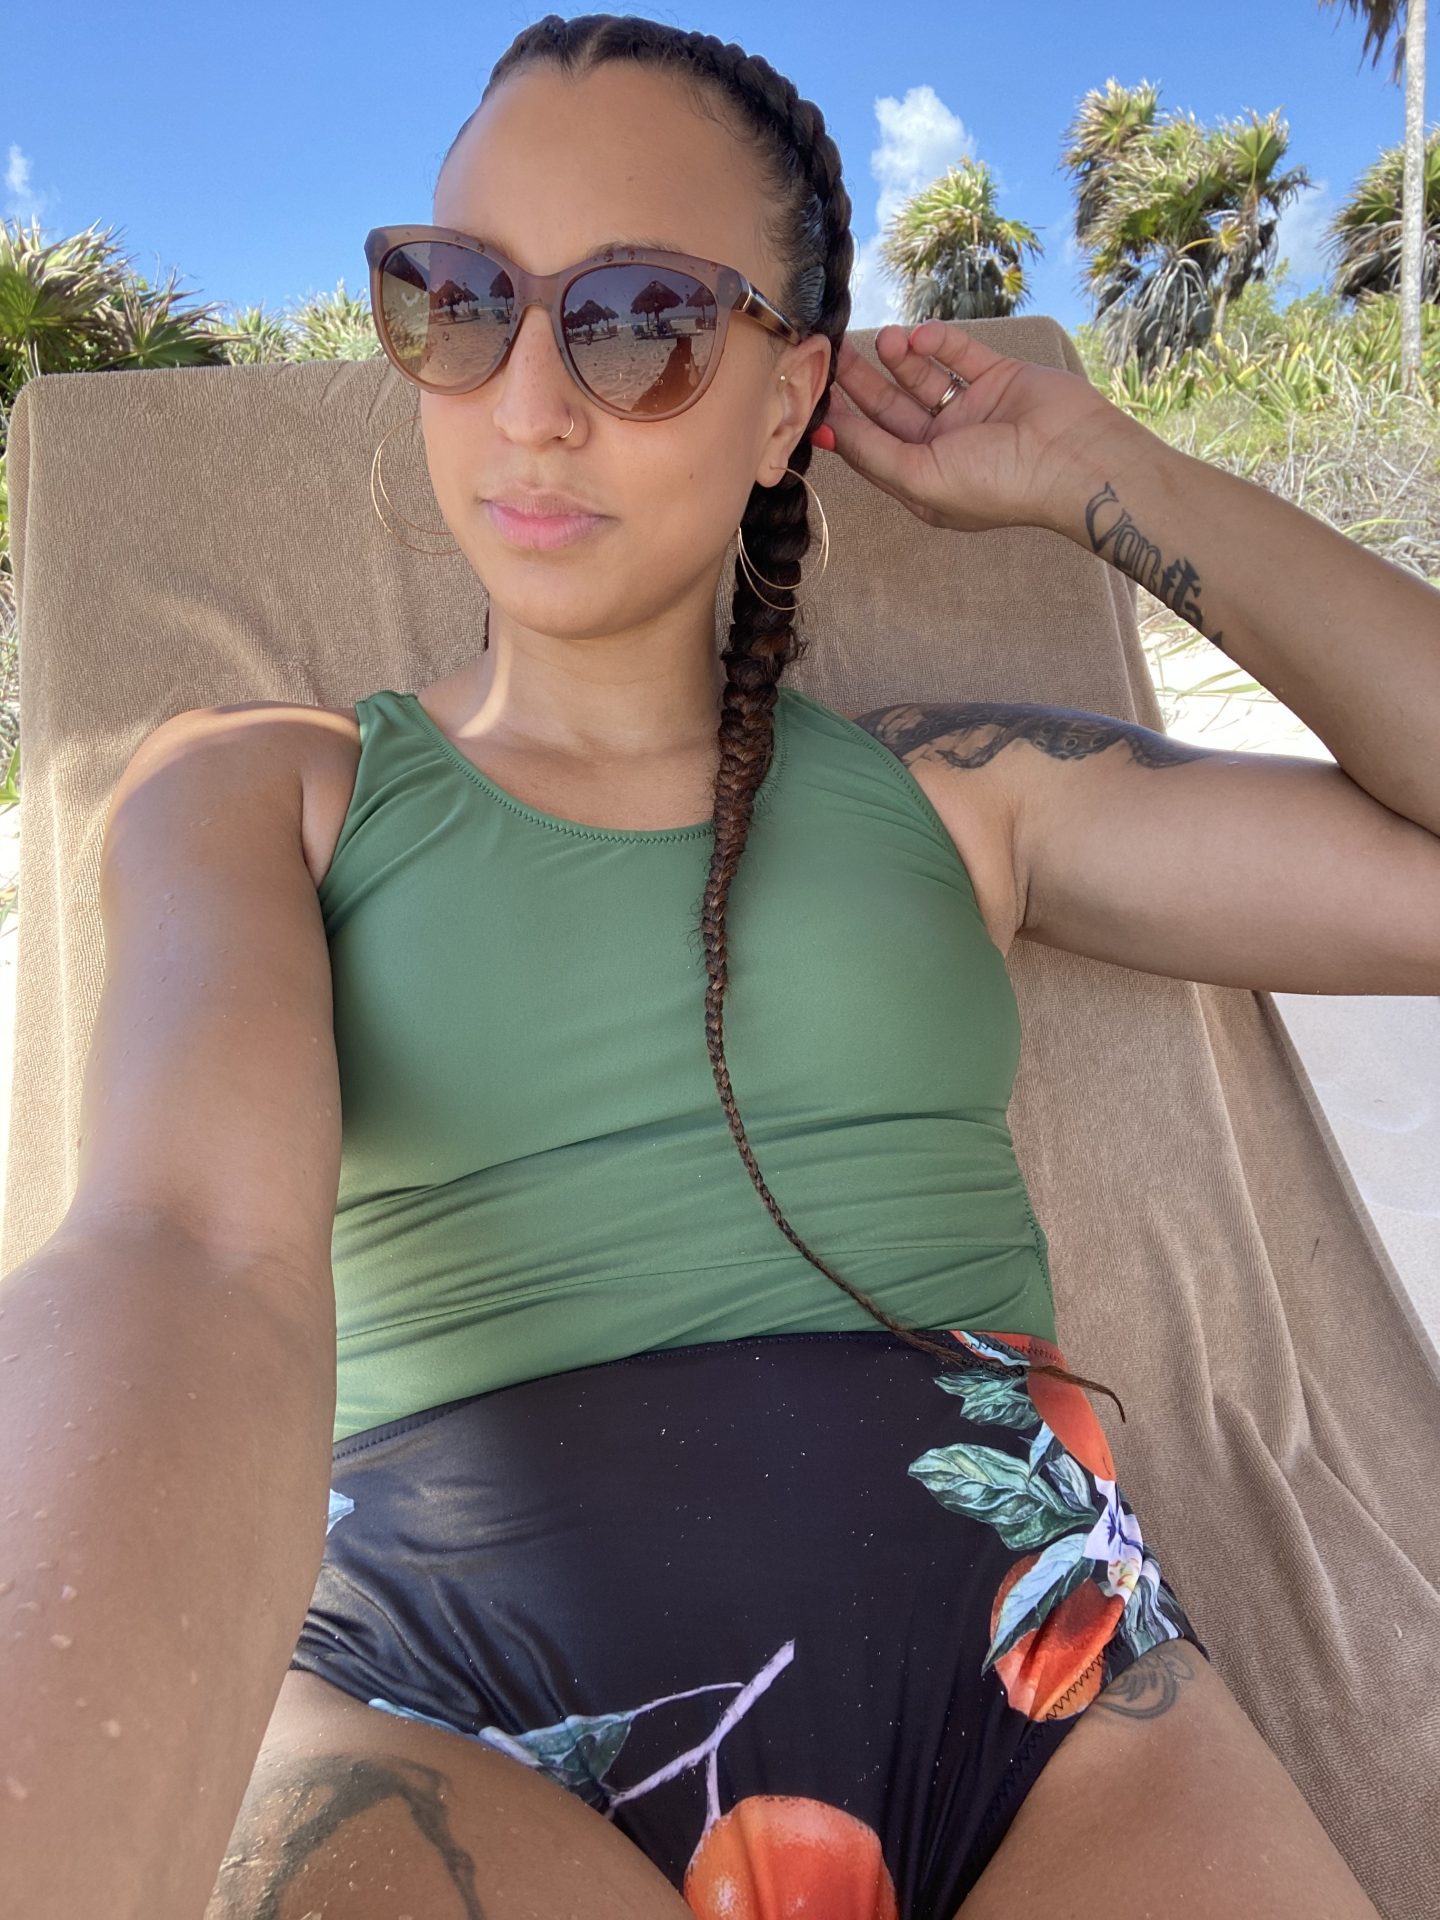 image of a mixed race woman wearing a green and black one-piece swimsuit. There are palm trees behind her.